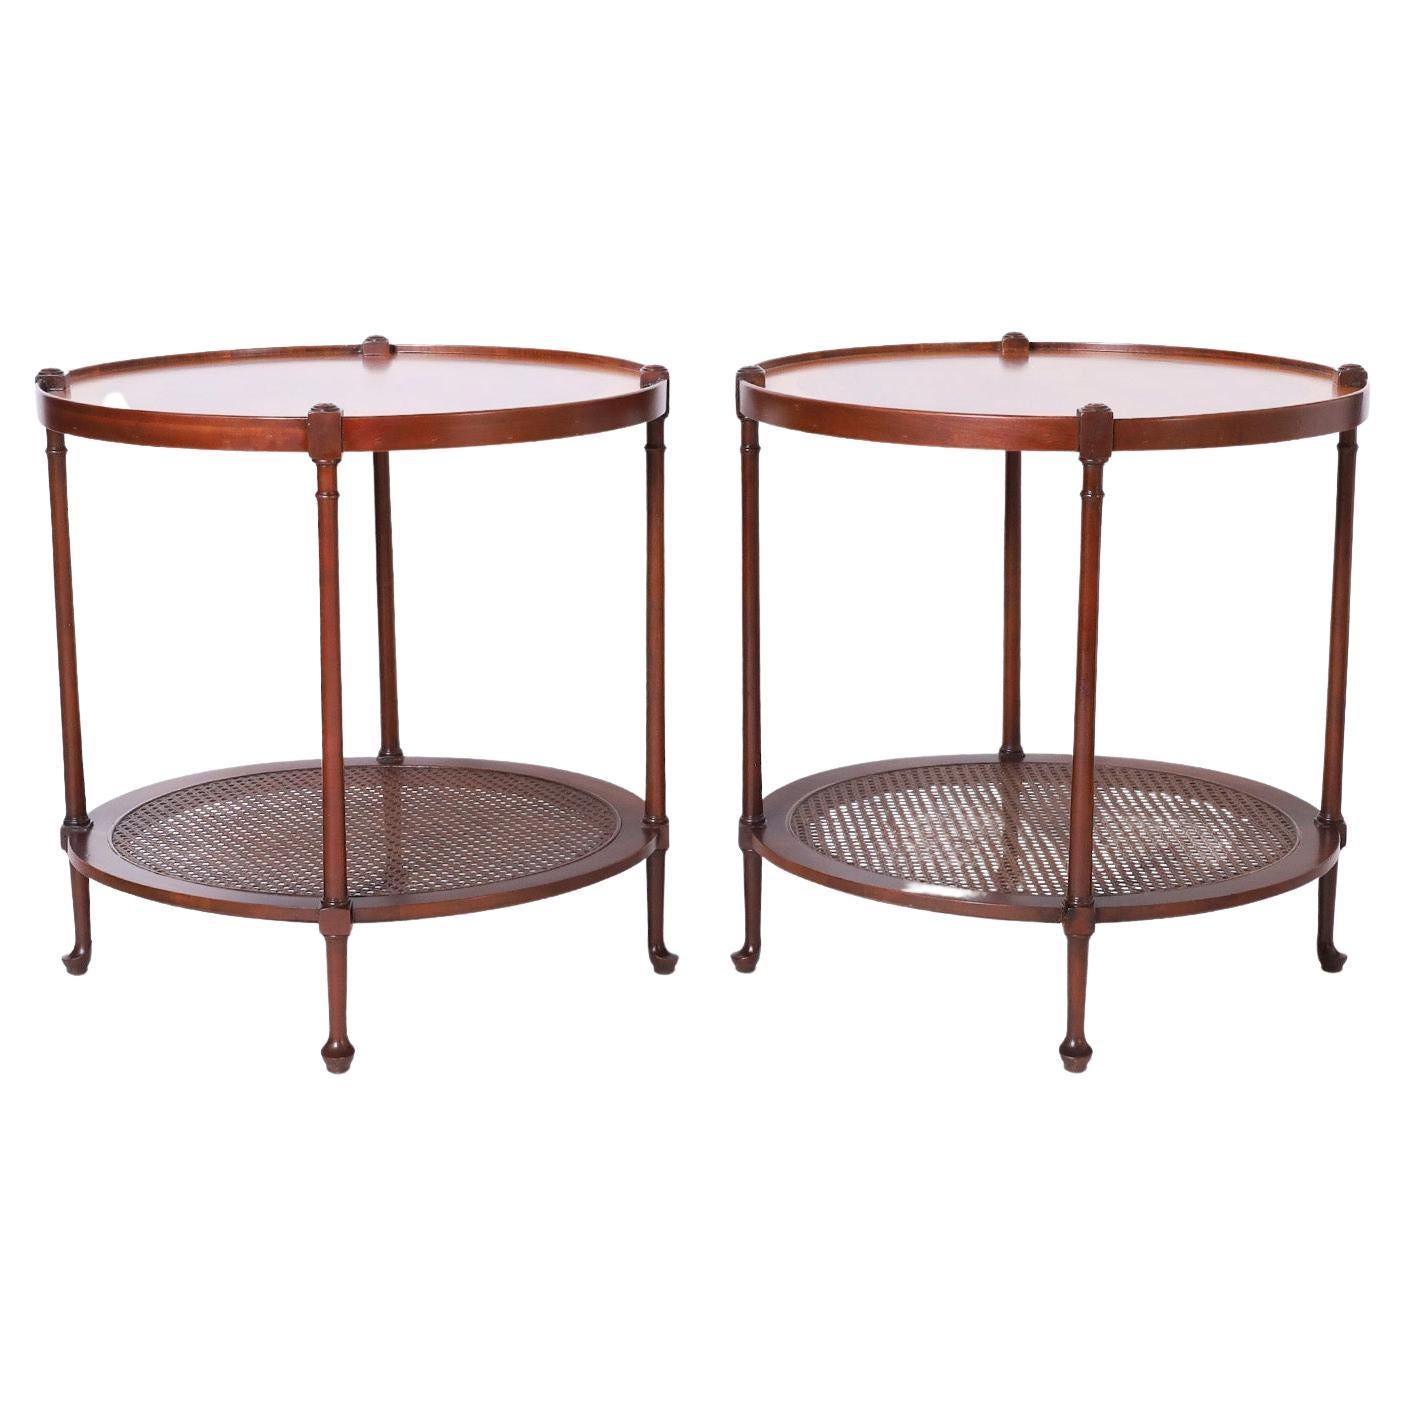 Pair of Midcentury Two Tiered Round Stands or Tables by Baker